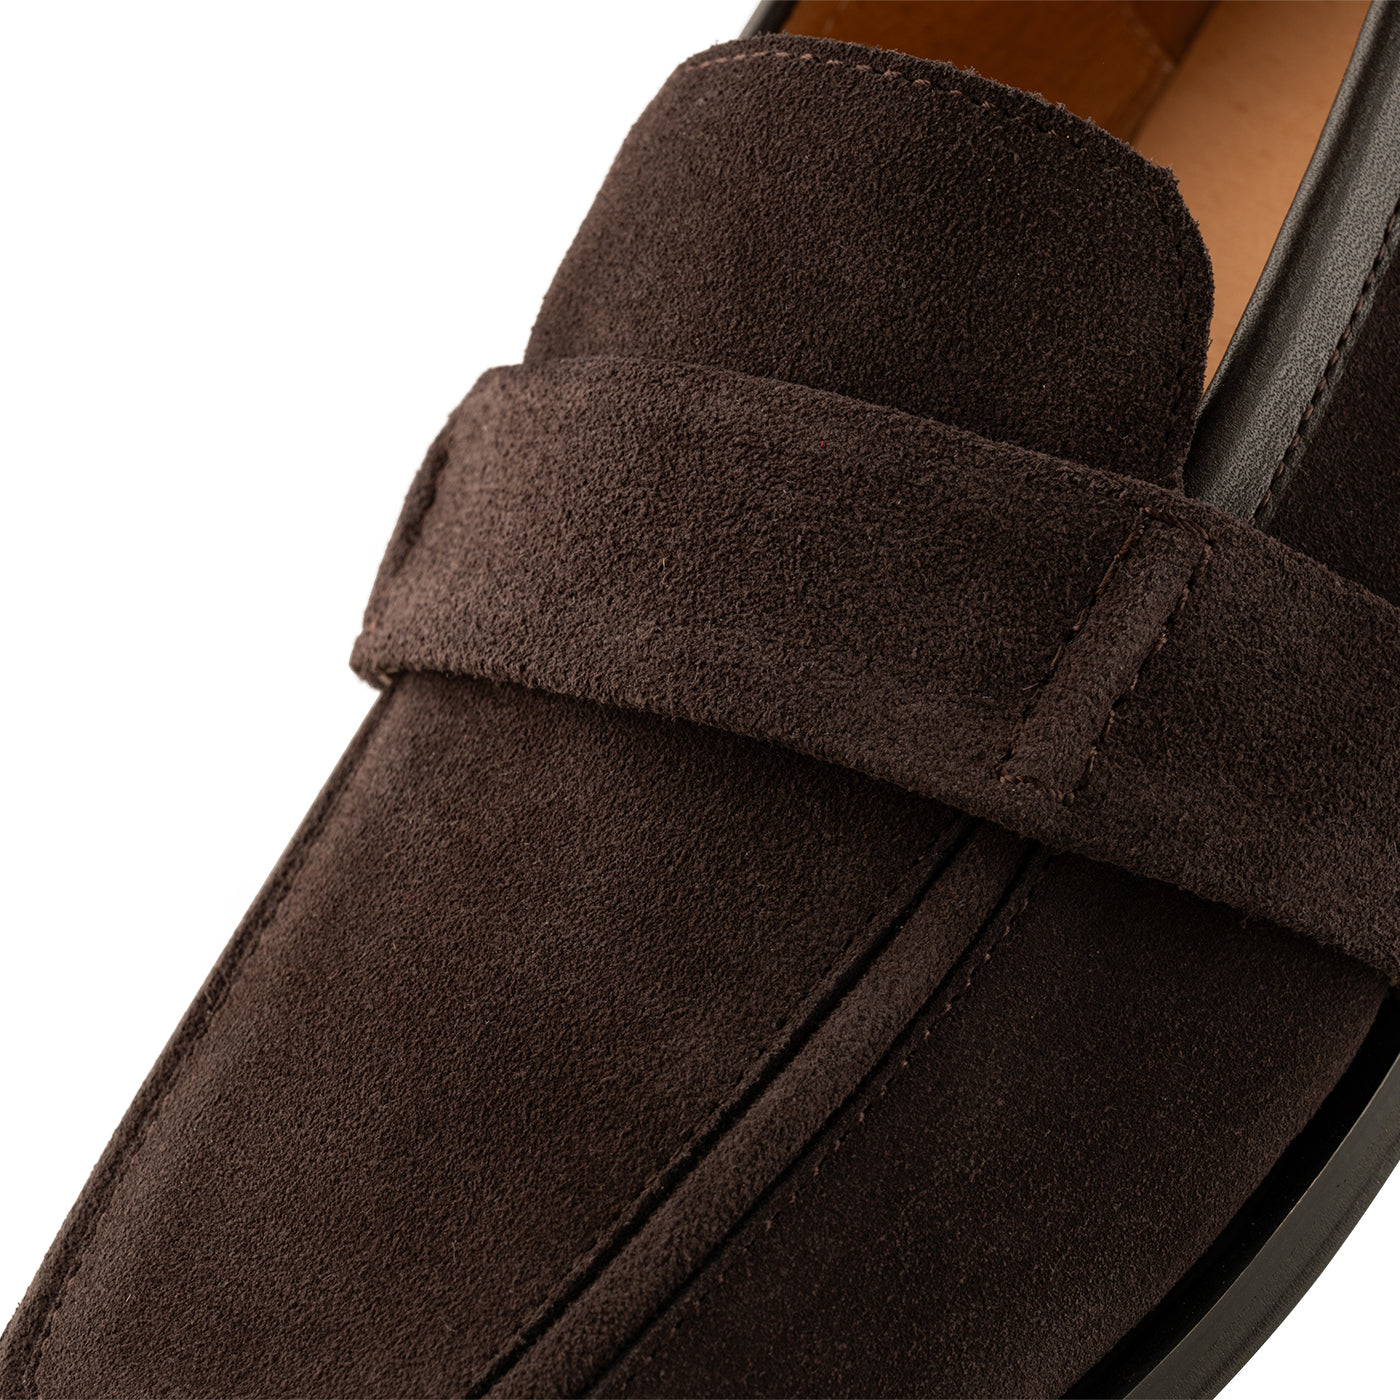 SHOE THE BEAR WOMENS Erika saddle loafer ruskind Loafers 063 Chocolate